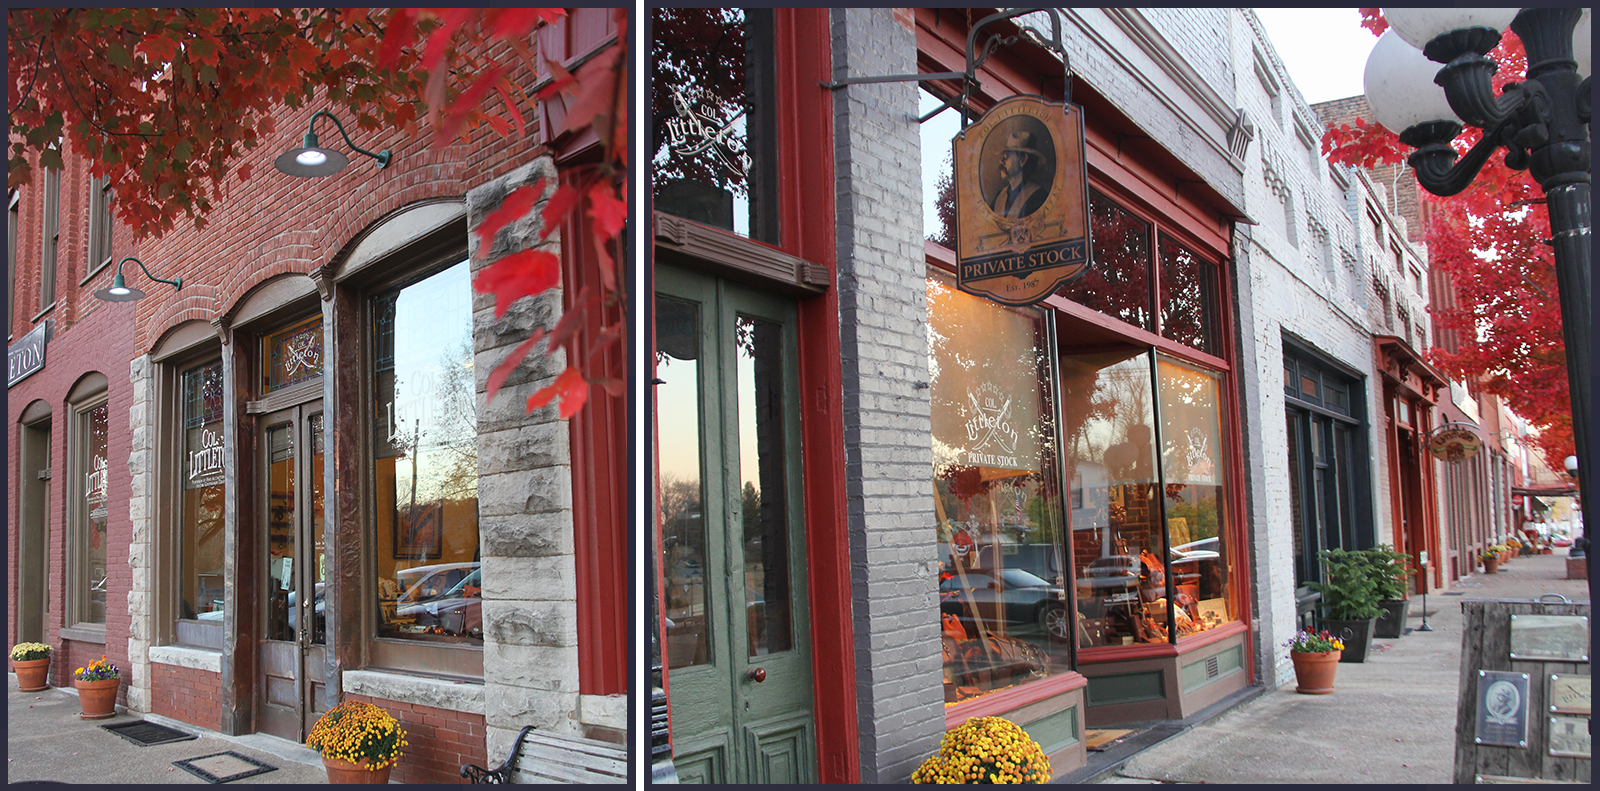 On the right is an angled image of the front door of the Colonel Littleton Retail Store and on the left is the front door of the Private Stock Store in downtown Lynnville, TN.